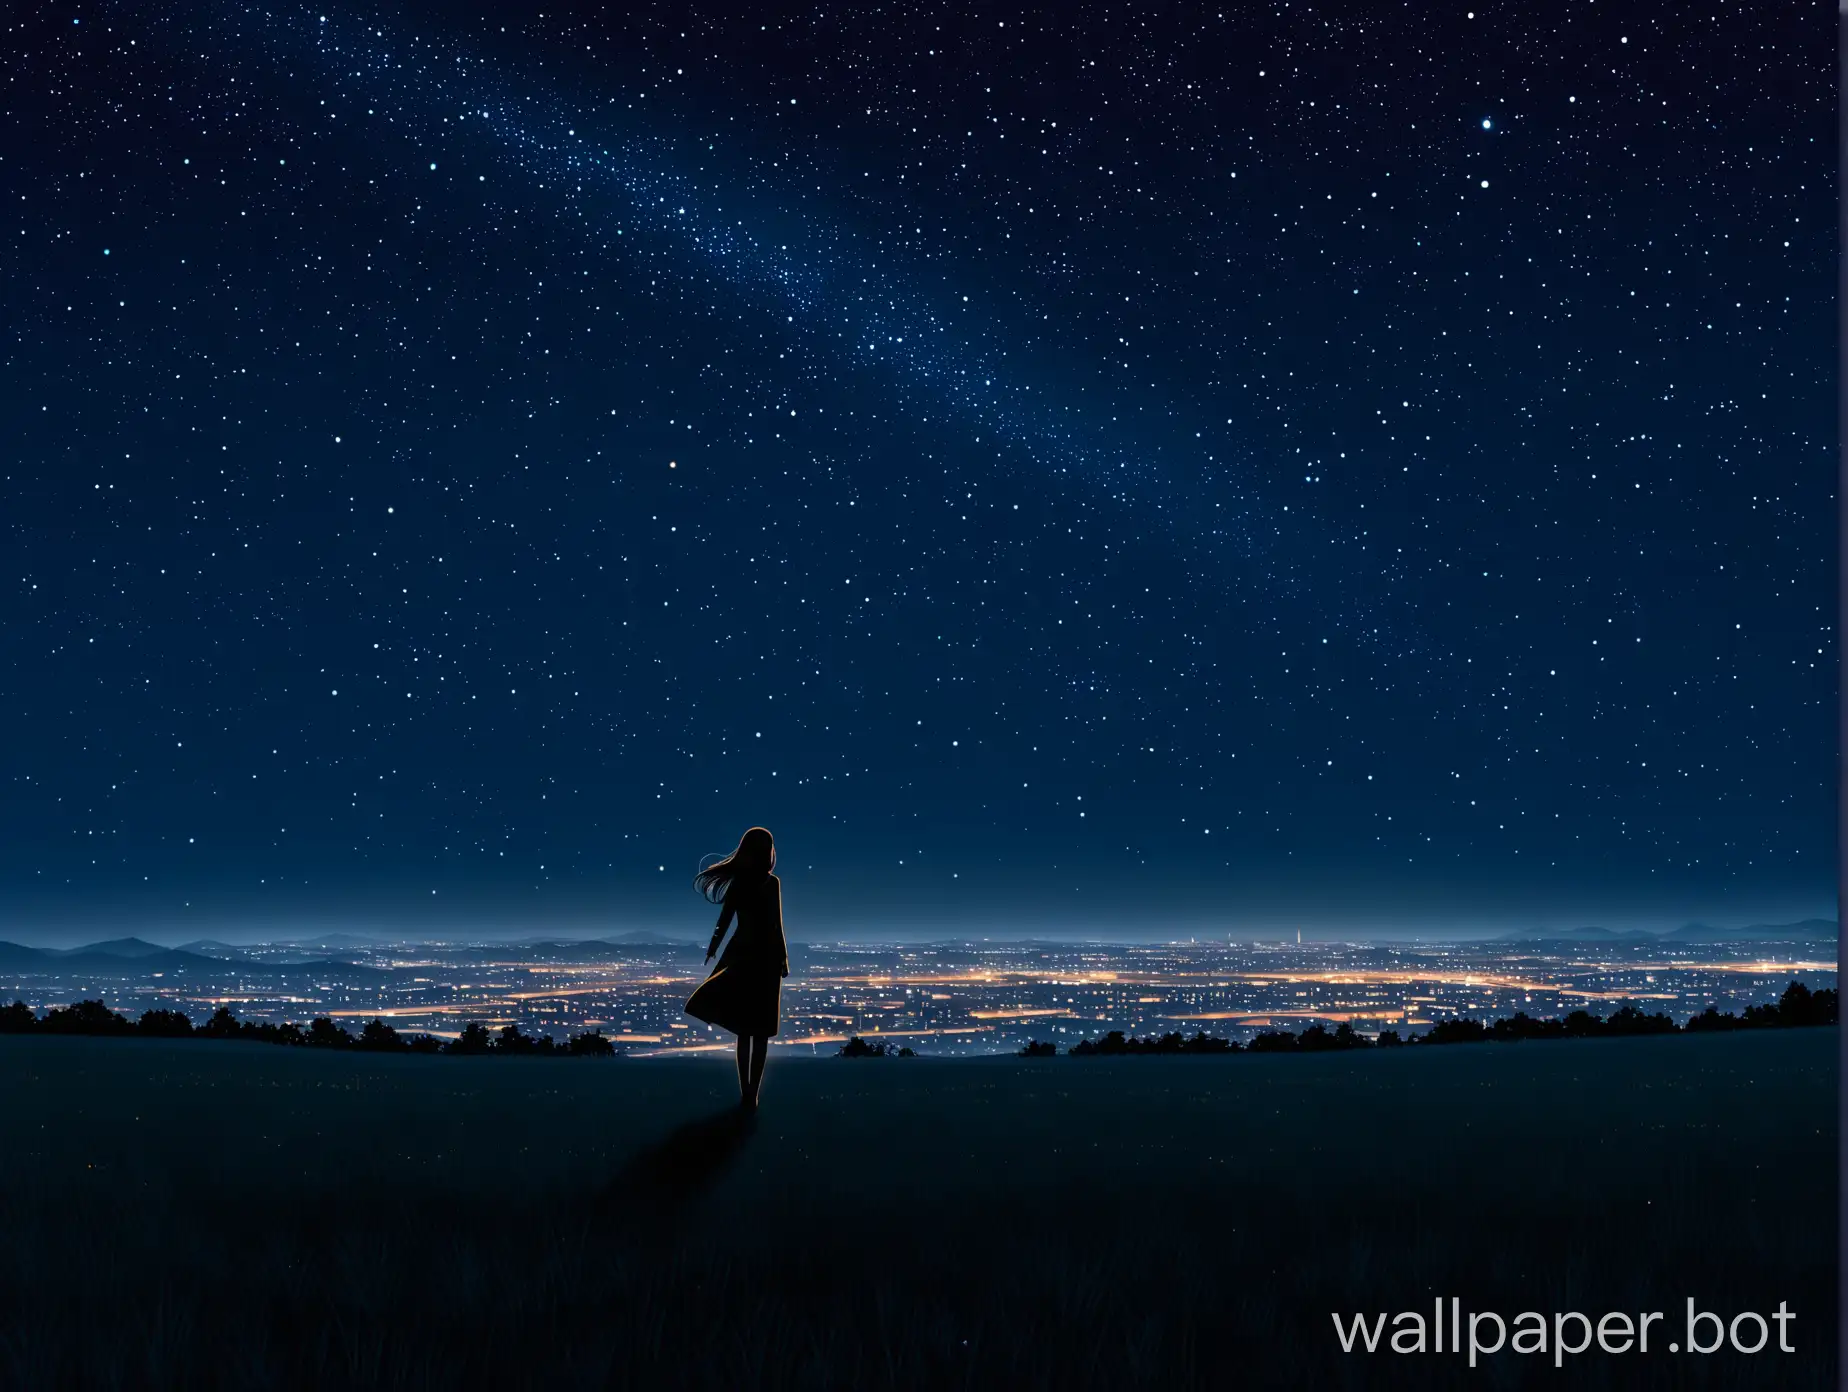 open field at night, starry sky, shadow of woman off to side, overlooking lit city in distance